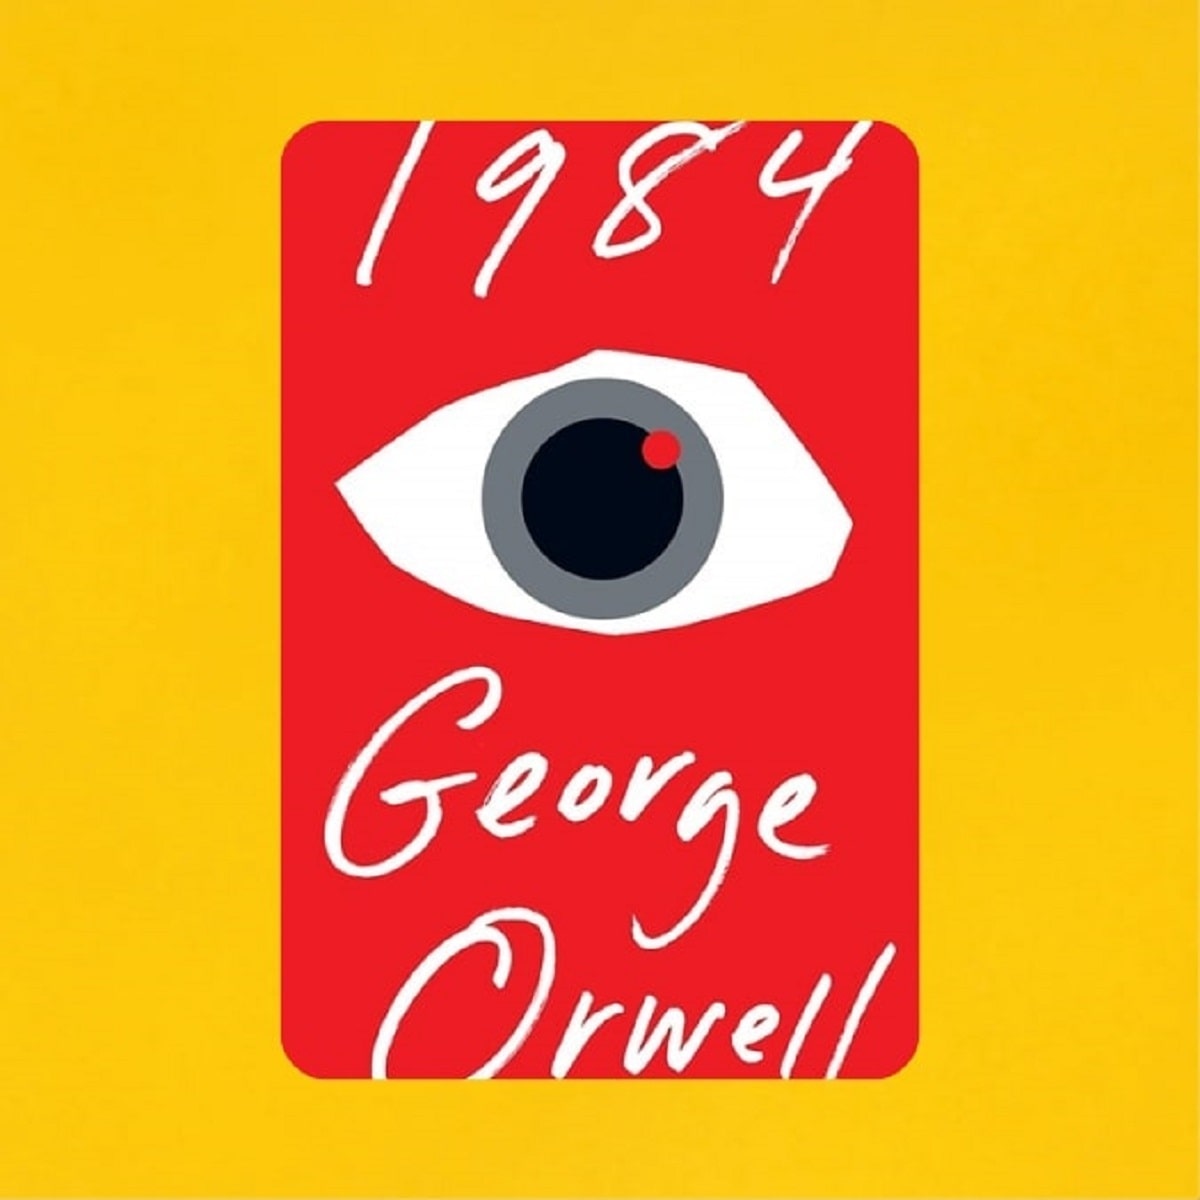 Review 1984 George Orwell